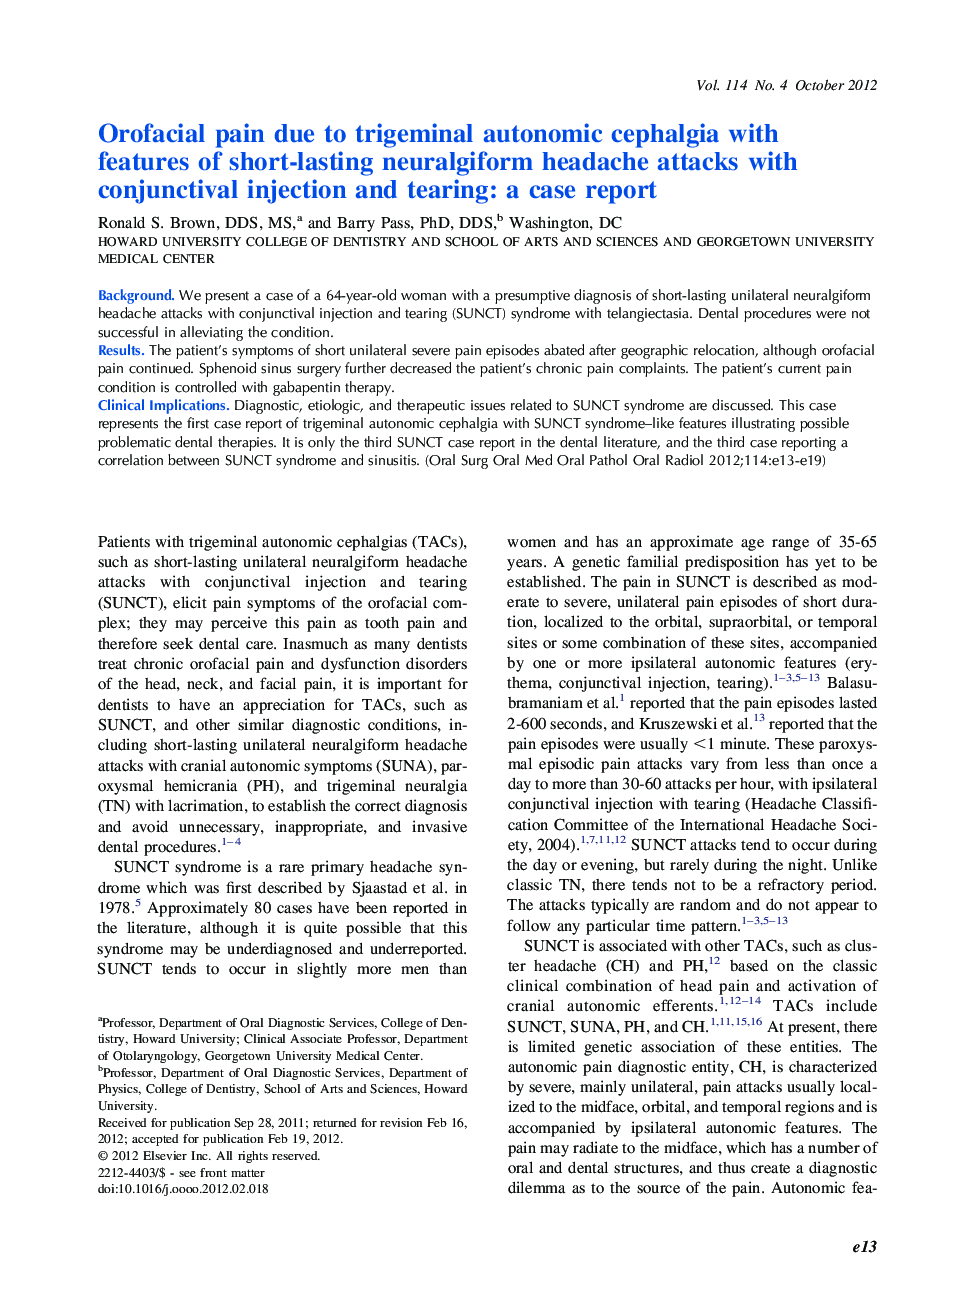 Orofacial pain due to trigeminal autonomic cephalgia with features of short-lasting neuralgiform headache attacks with conjunctival injection and tearing: a case report